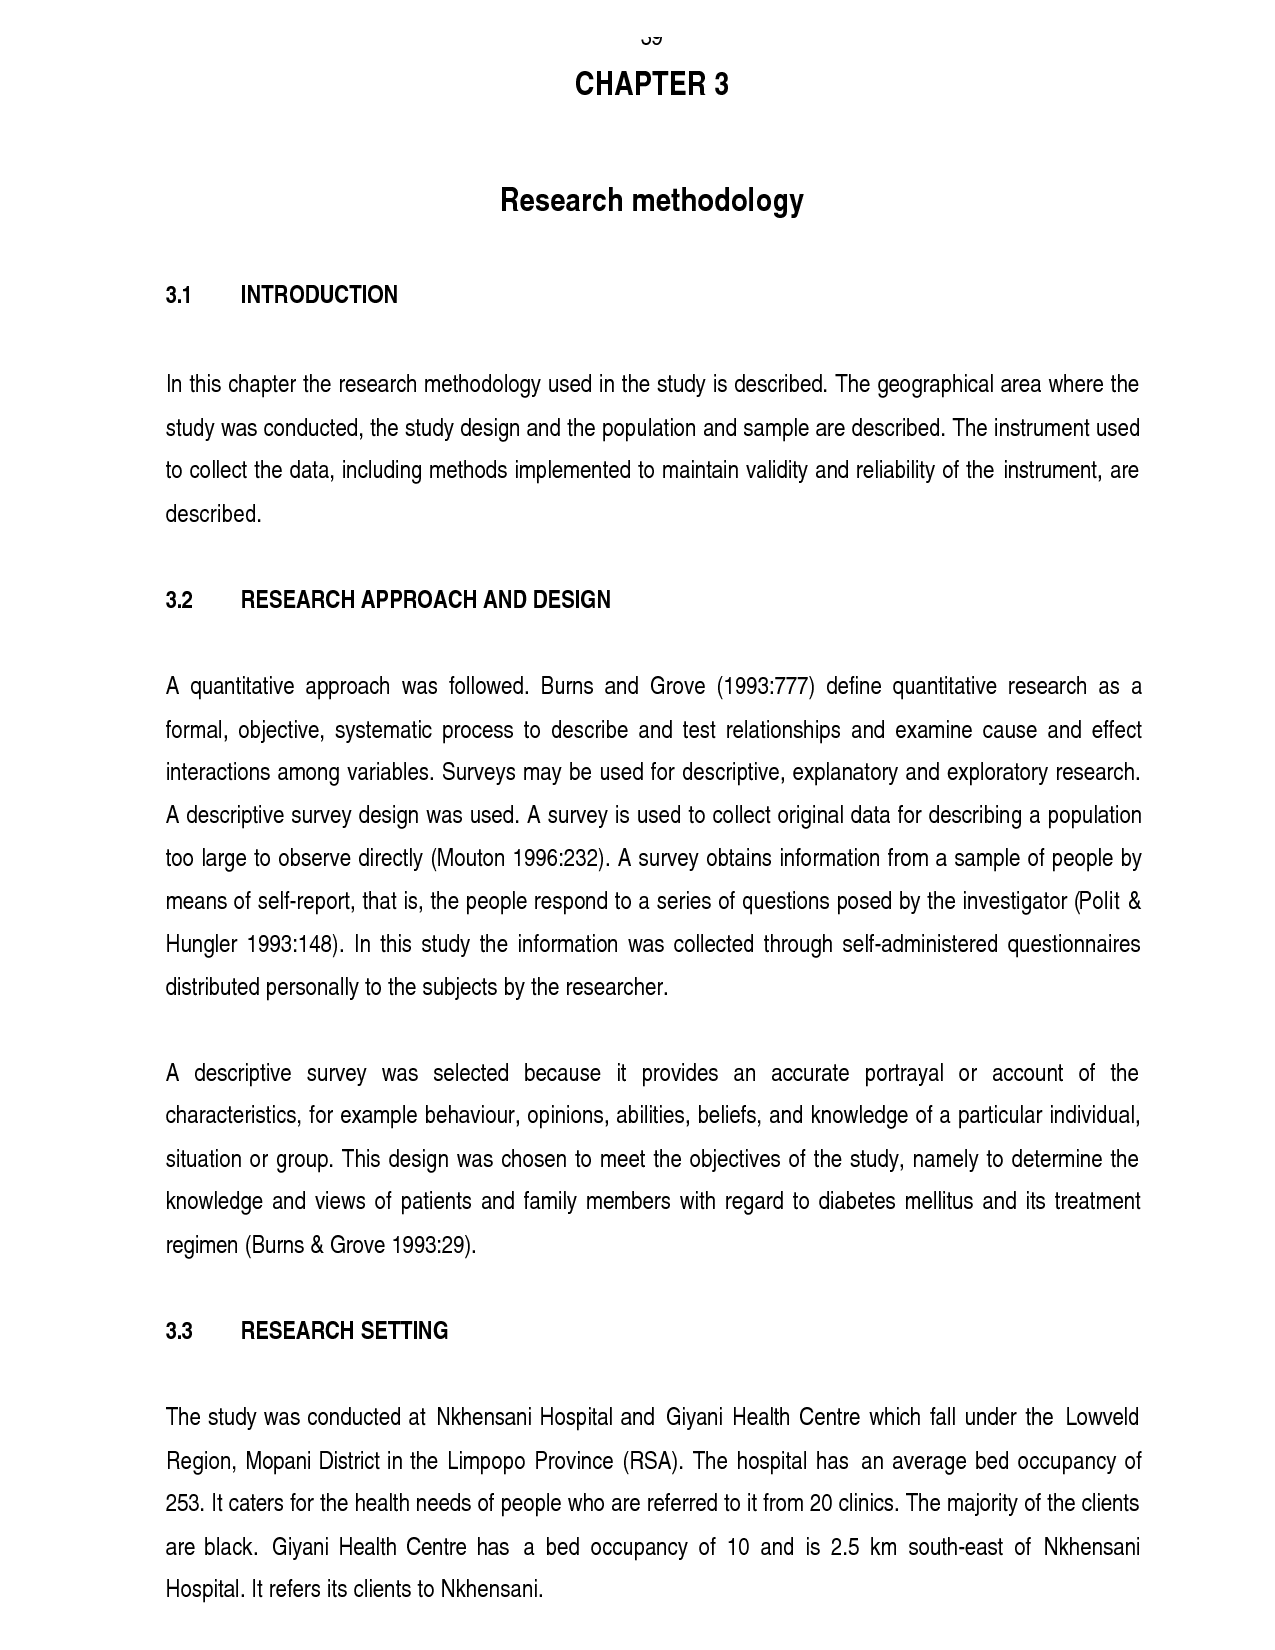 How to write research methodology for a dissertation